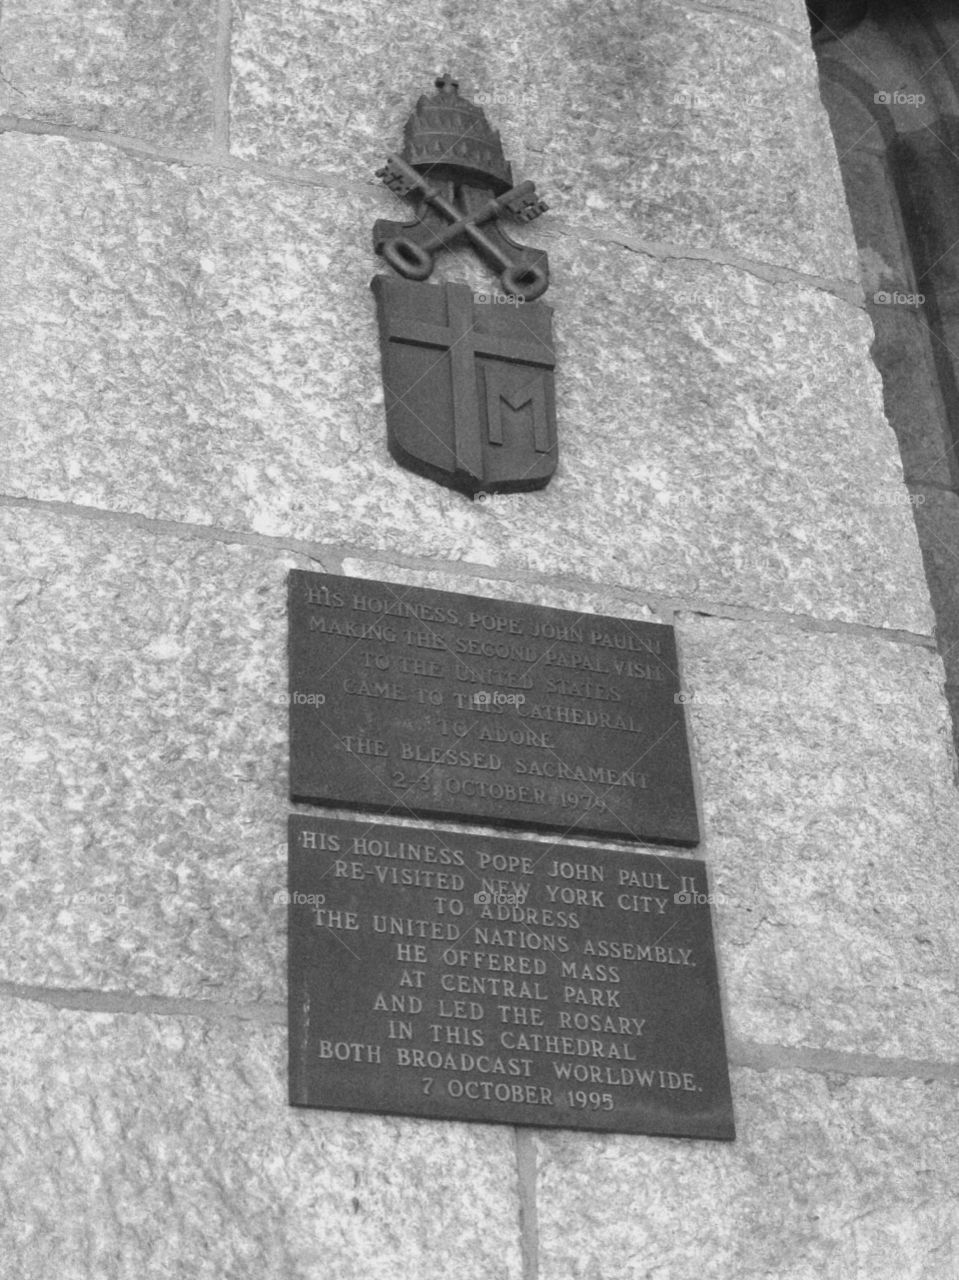 Plaque on church in New York